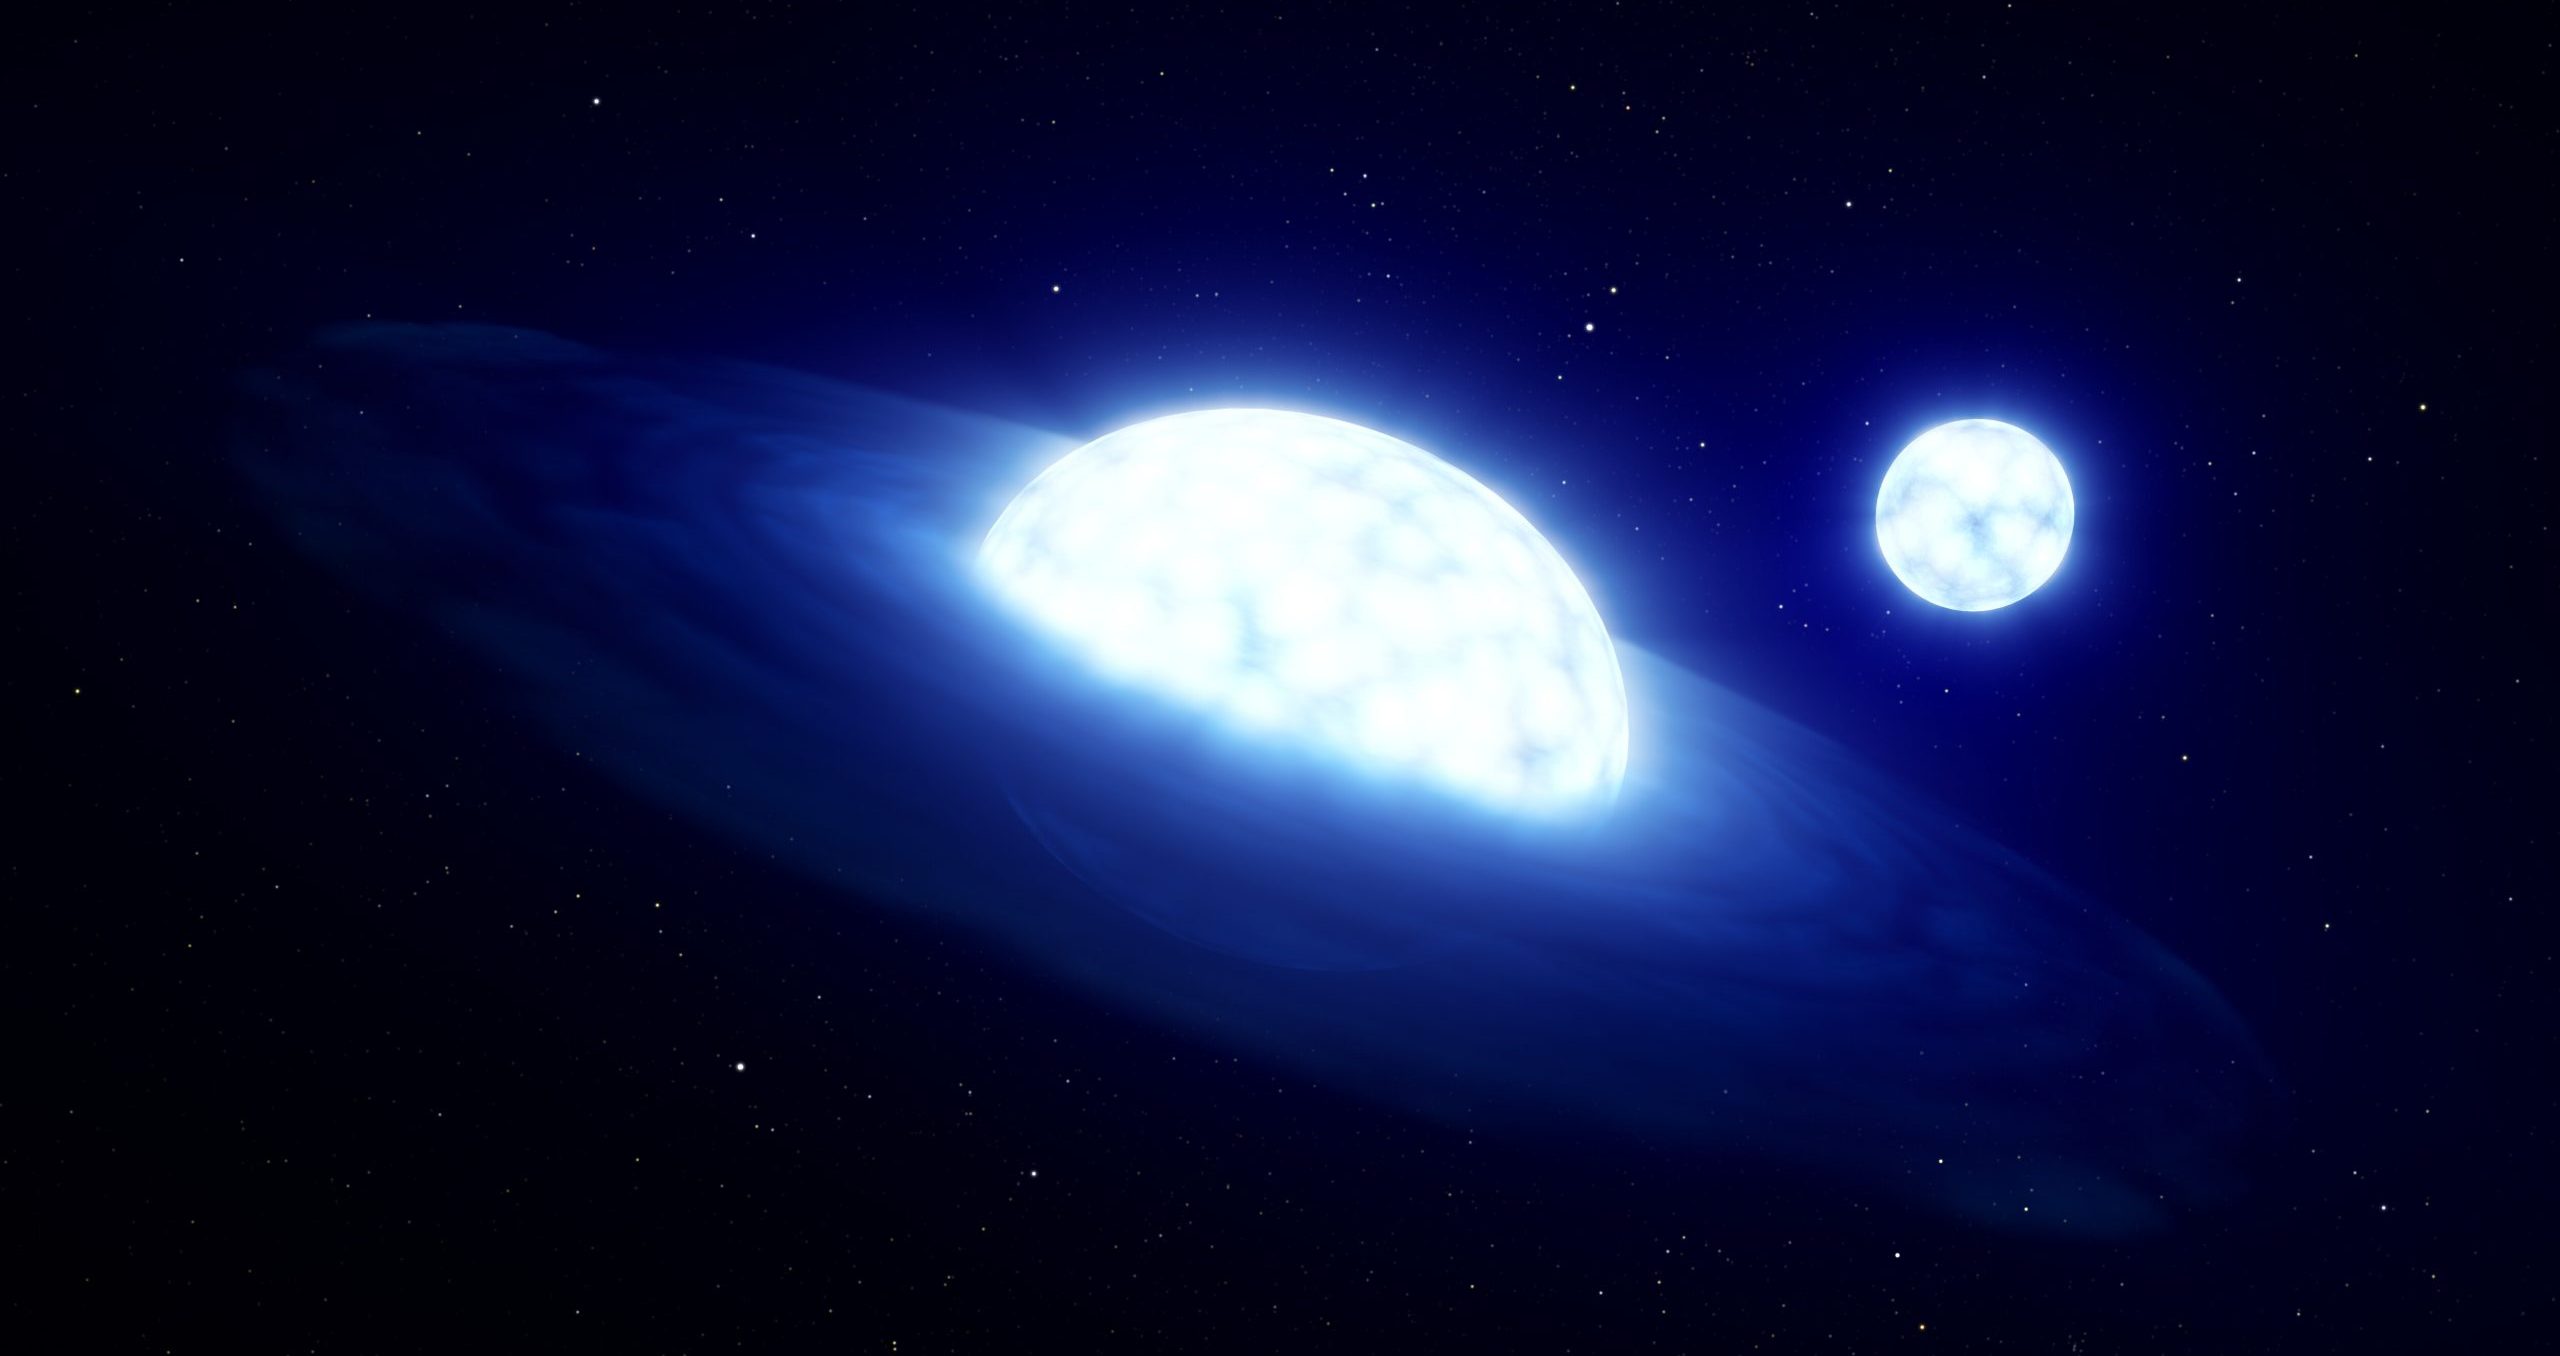 Artist's impression of the binary system that was believed to host the closest black hole to Earth. Credit: ESO/L. Calçada